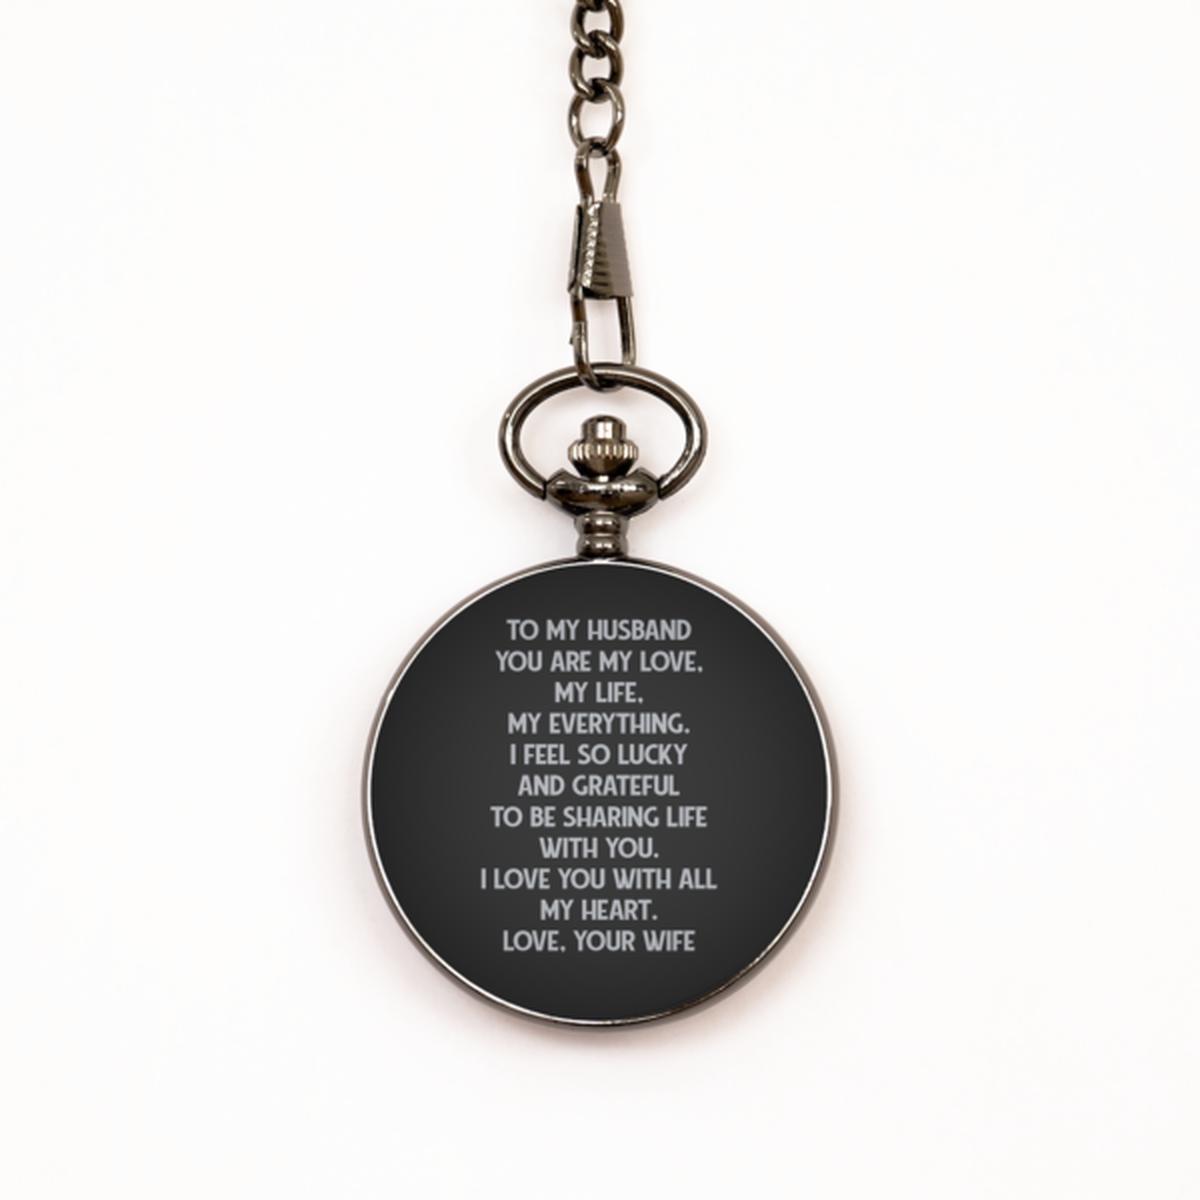 To My Husband Black Pocket Watch, I Love You With All My Heart, Anniversary Gifts For Husband From Wife, Birthday Gifts For Men